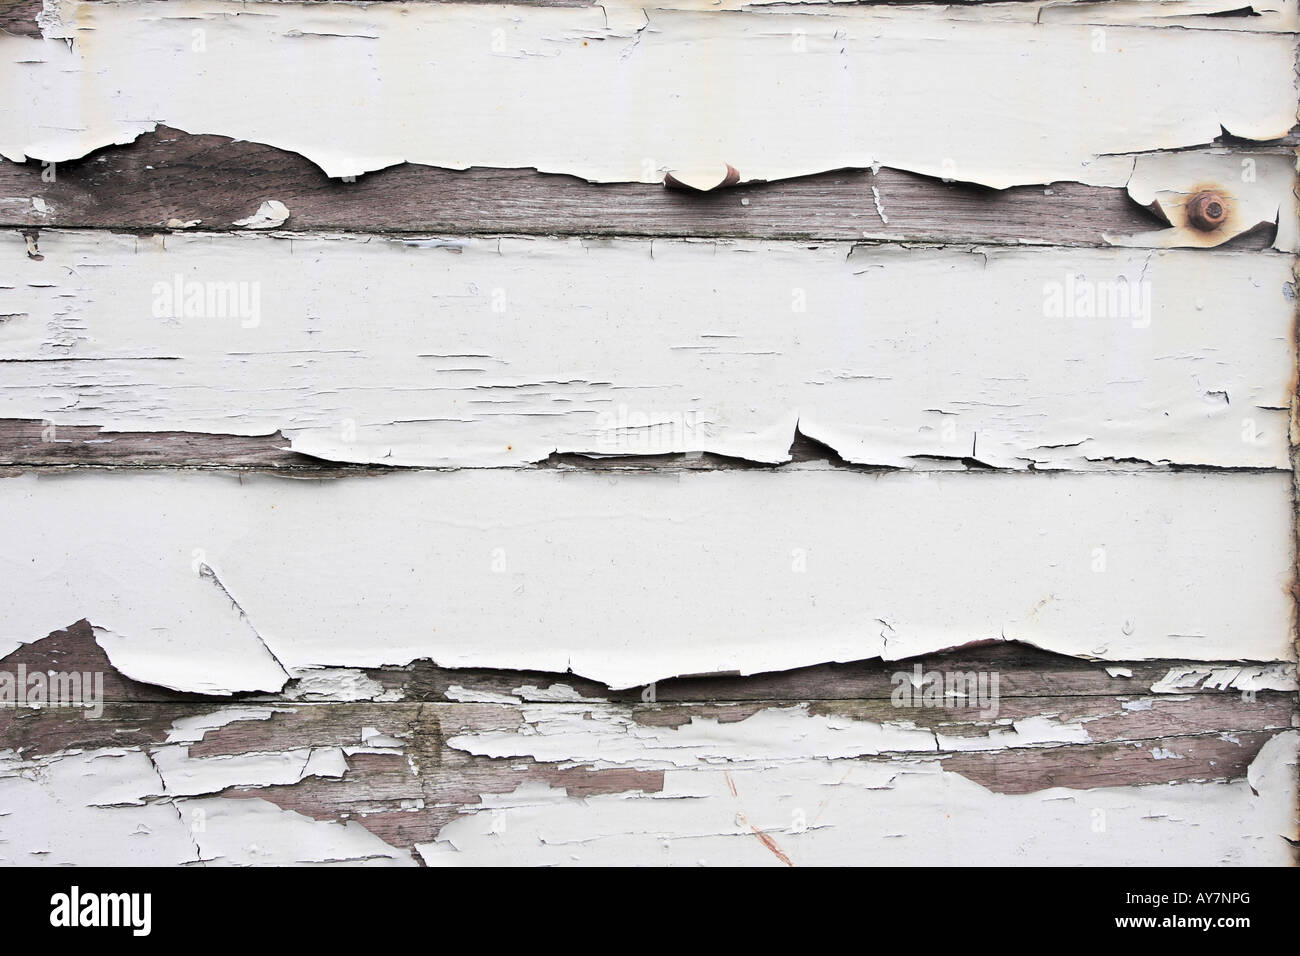 Old white paint peeling of wood perfect for designs or backgrounds Stock Photo